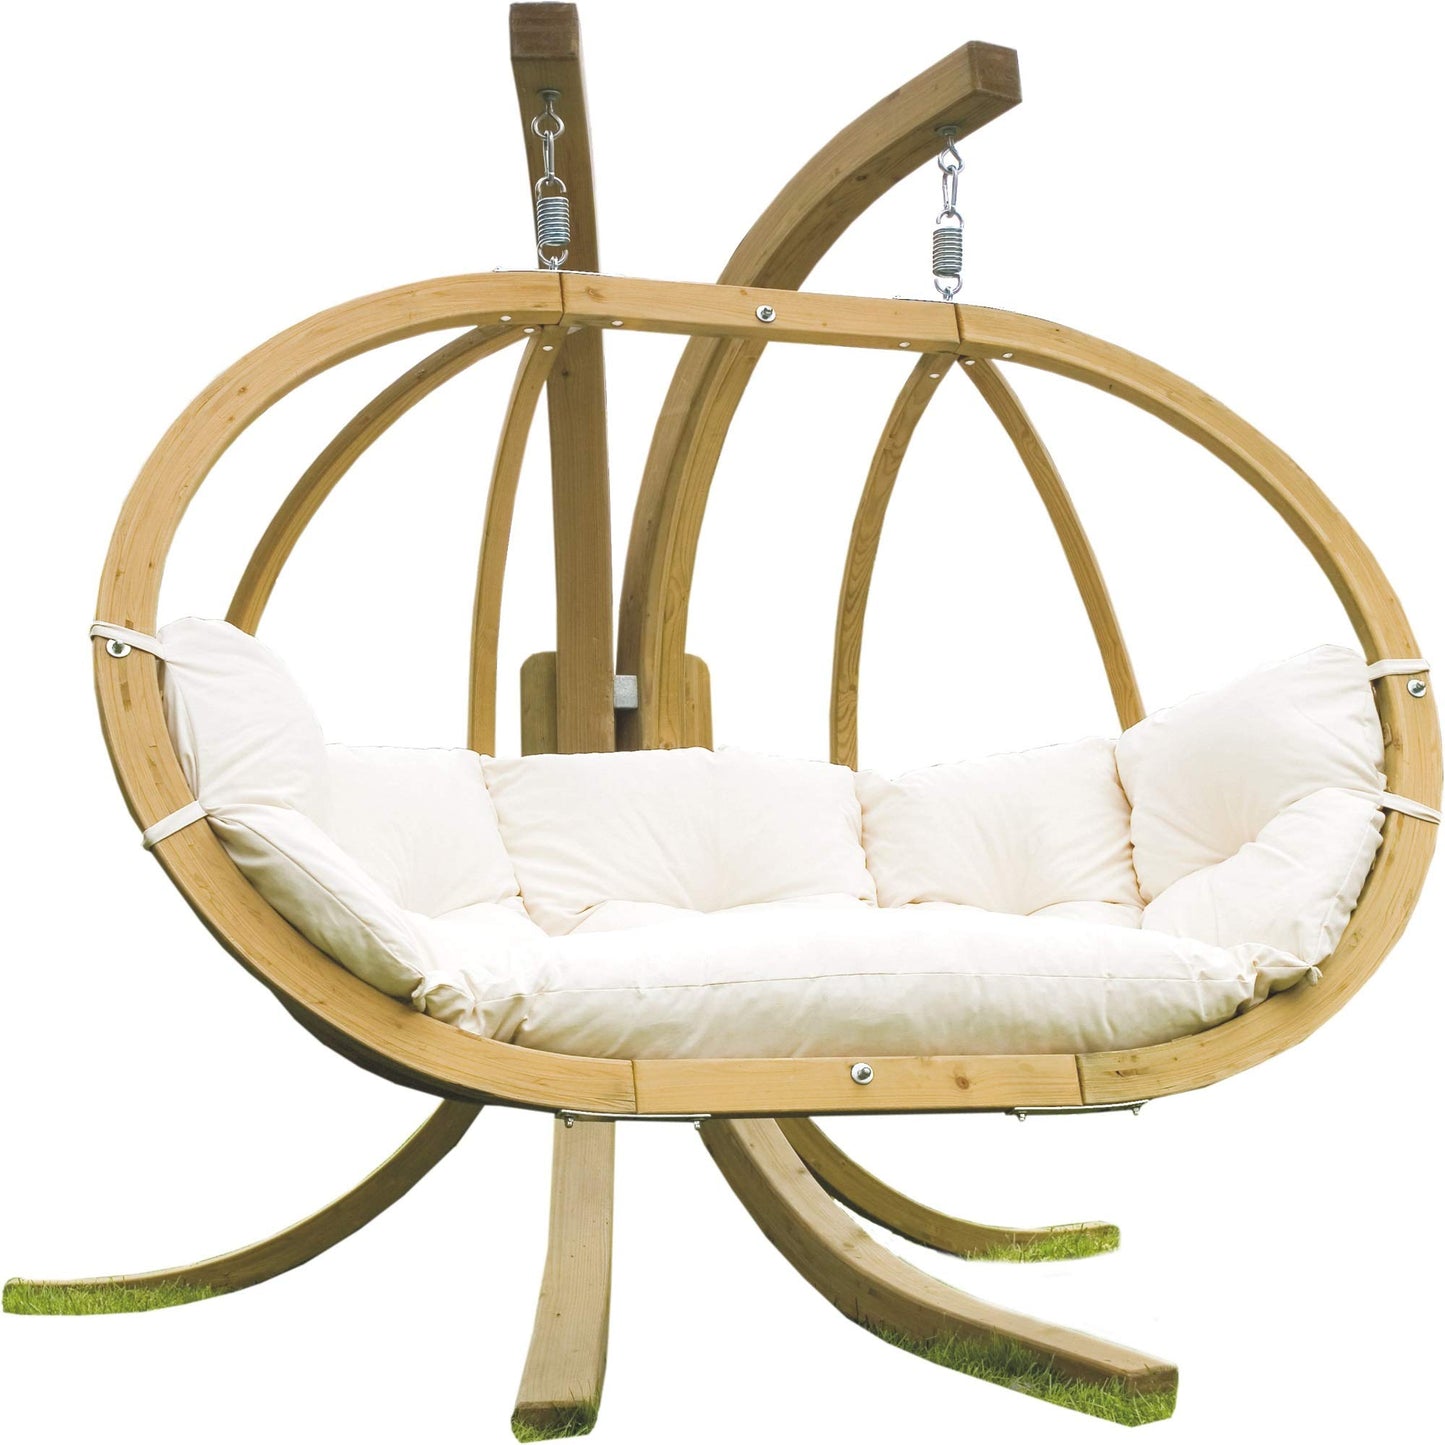 Double Globo Hanging Chair with White Cushions - Outdoor Living and Style